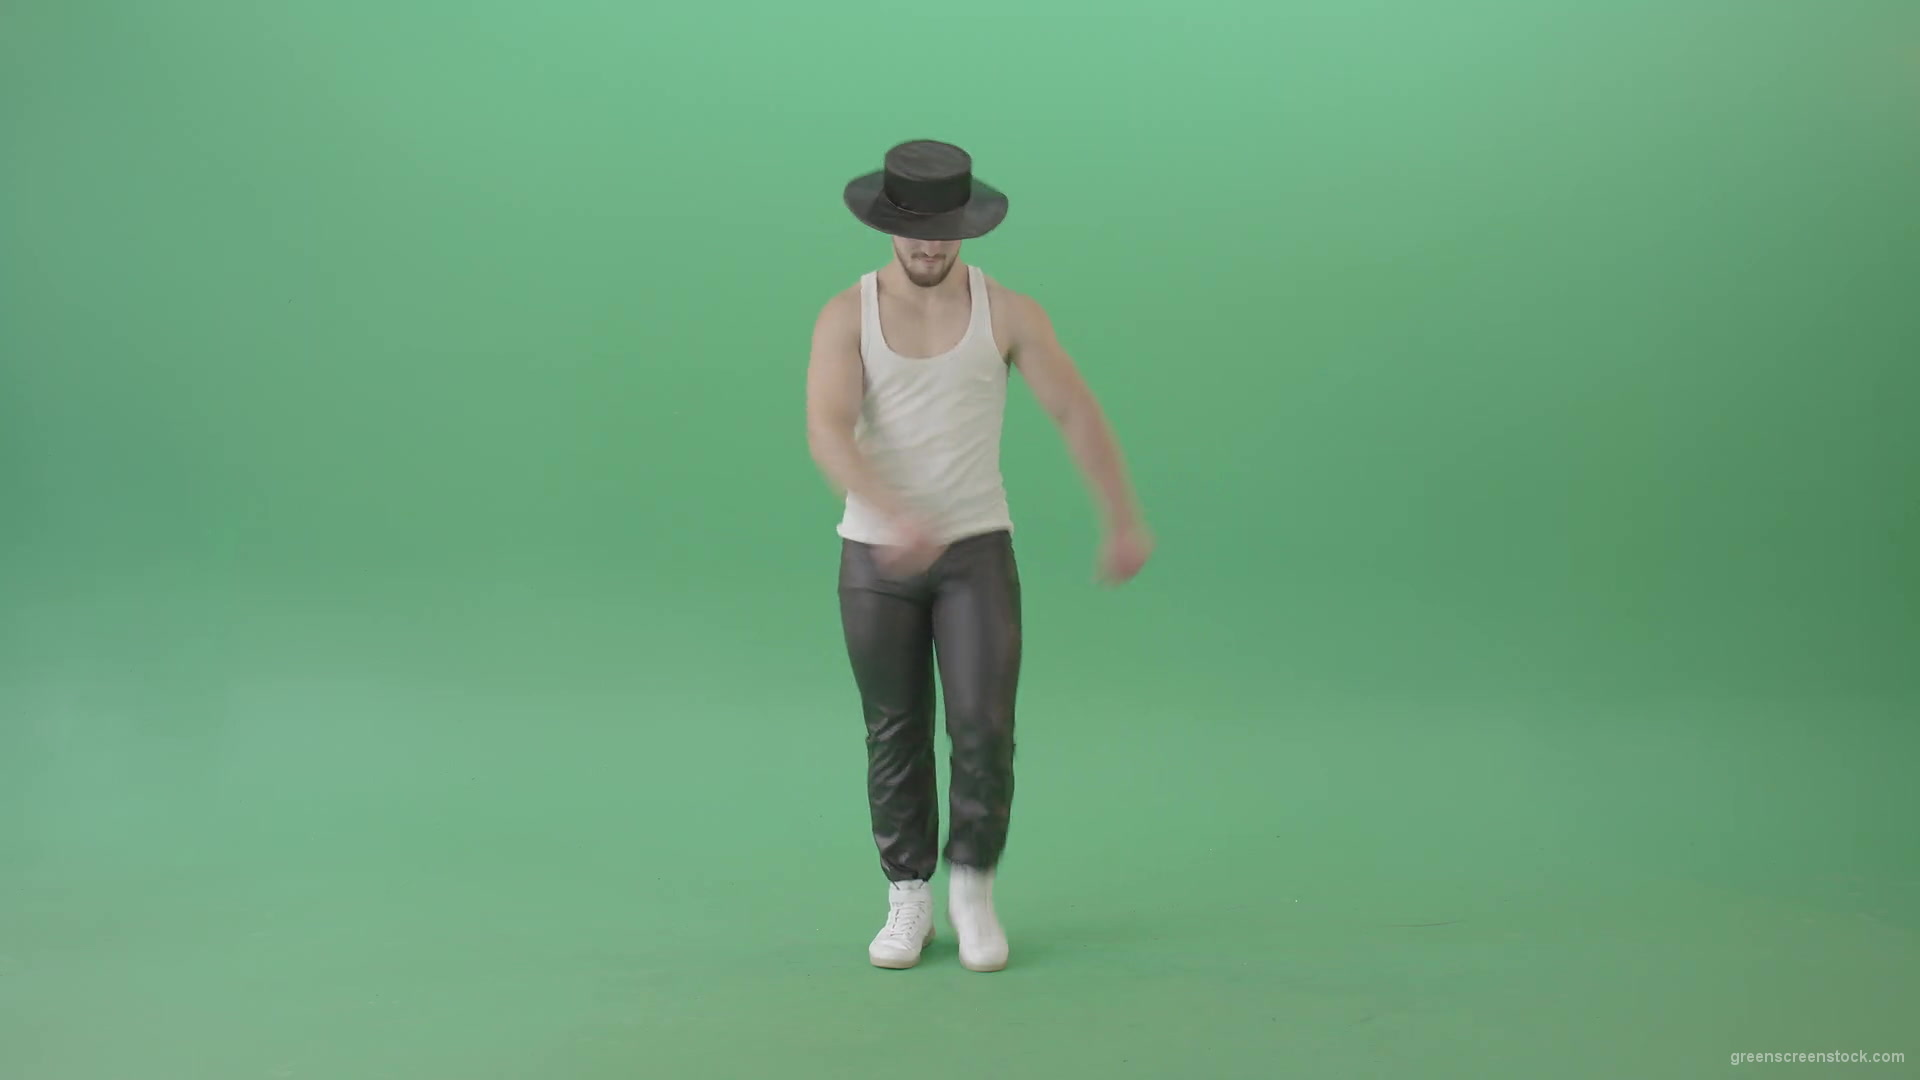 Funny-Man-marching-in-beat-isolated-on-Green-Screen-Chroma-Key-4K-Video-Footage-1920_009 Green Screen Stock